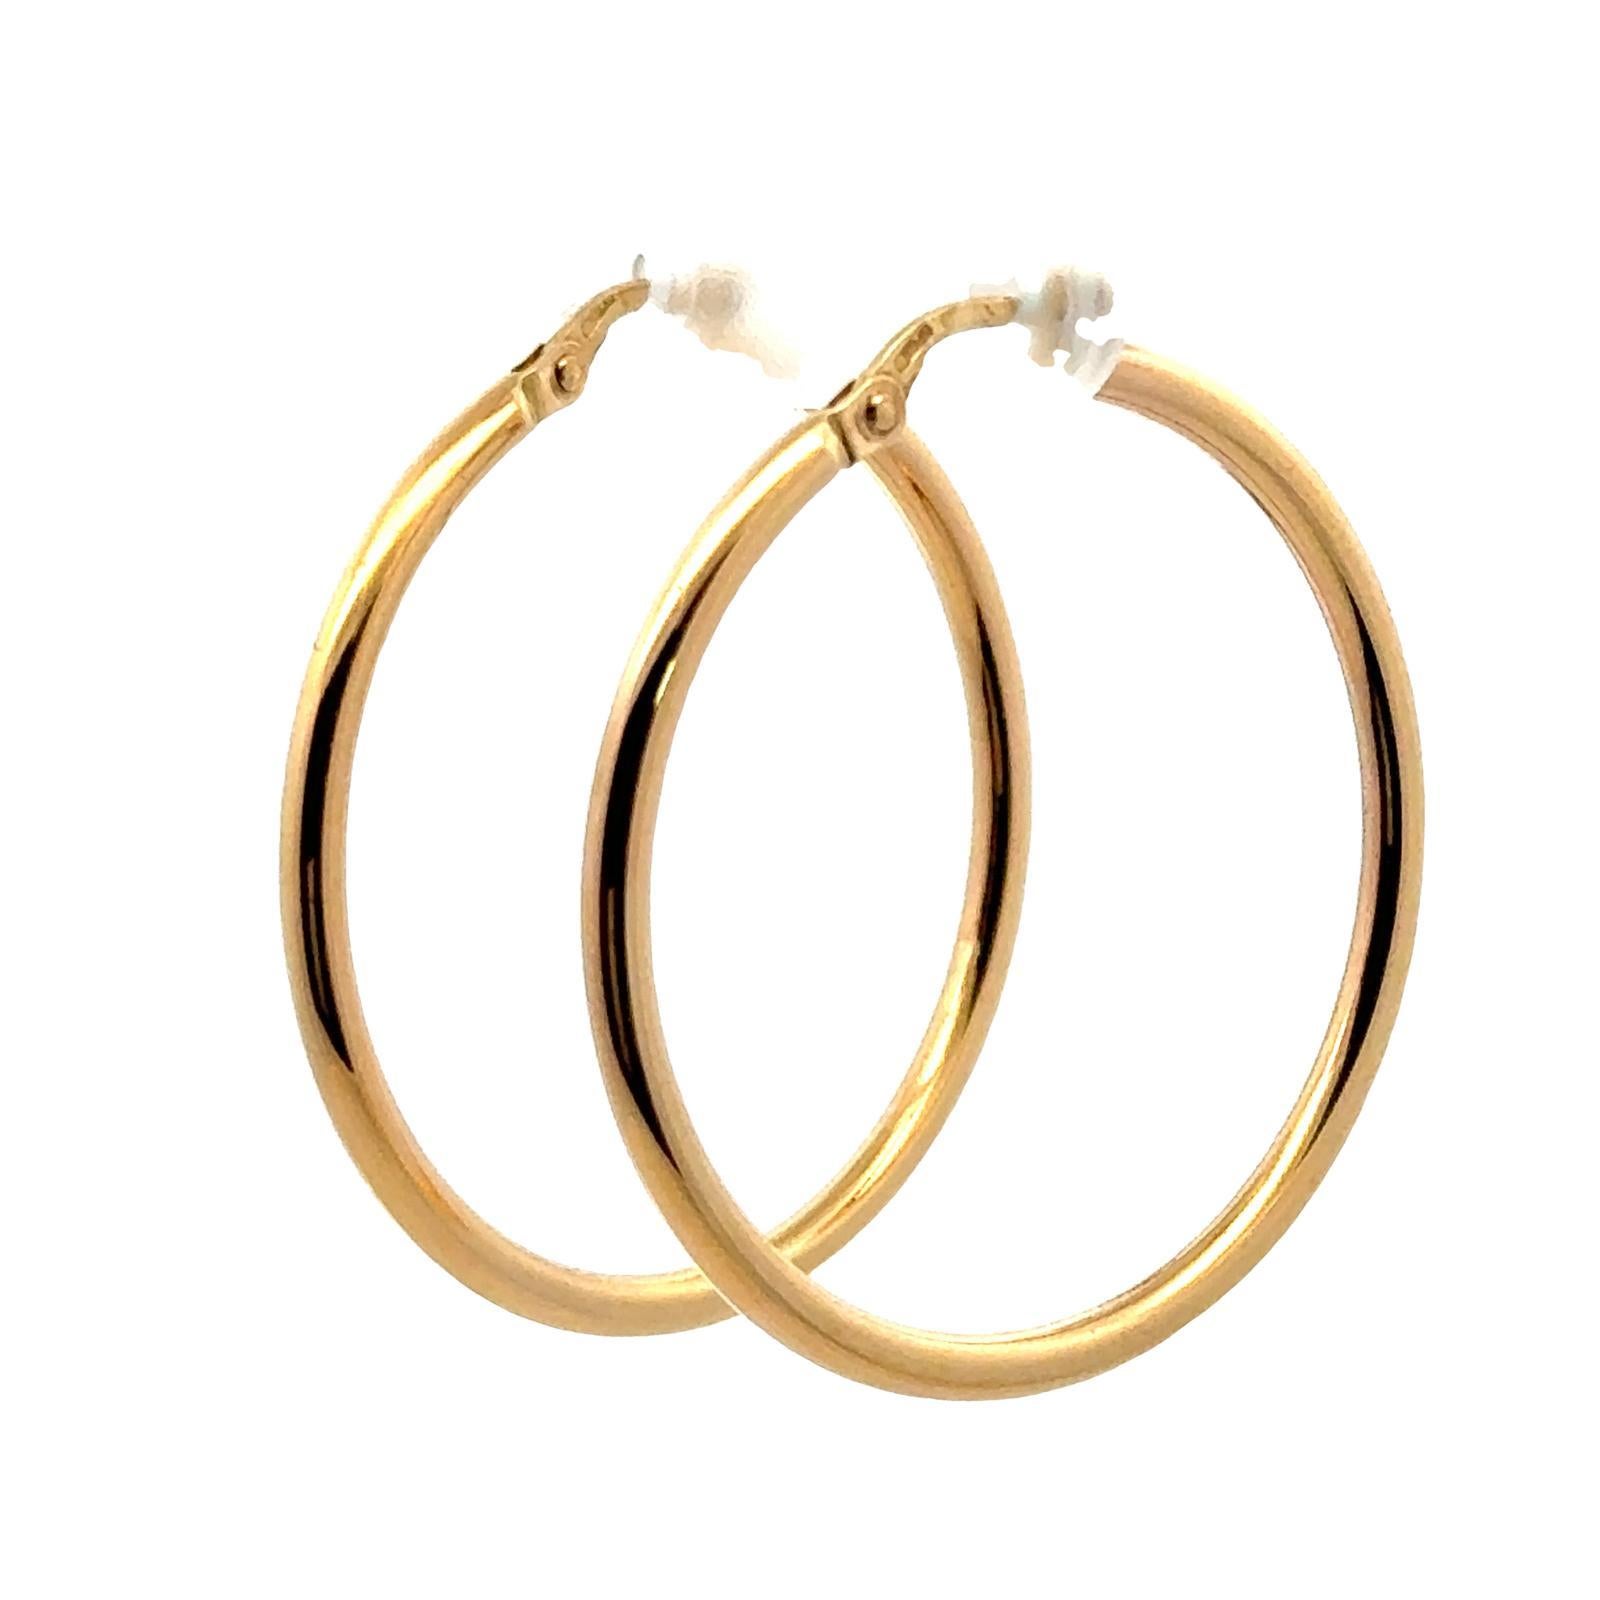 Roberto Coin Medium Round 18 Karat Yellow Gold Modern Hoop Earrings In Excellent Condition For Sale In Boca Raton, FL